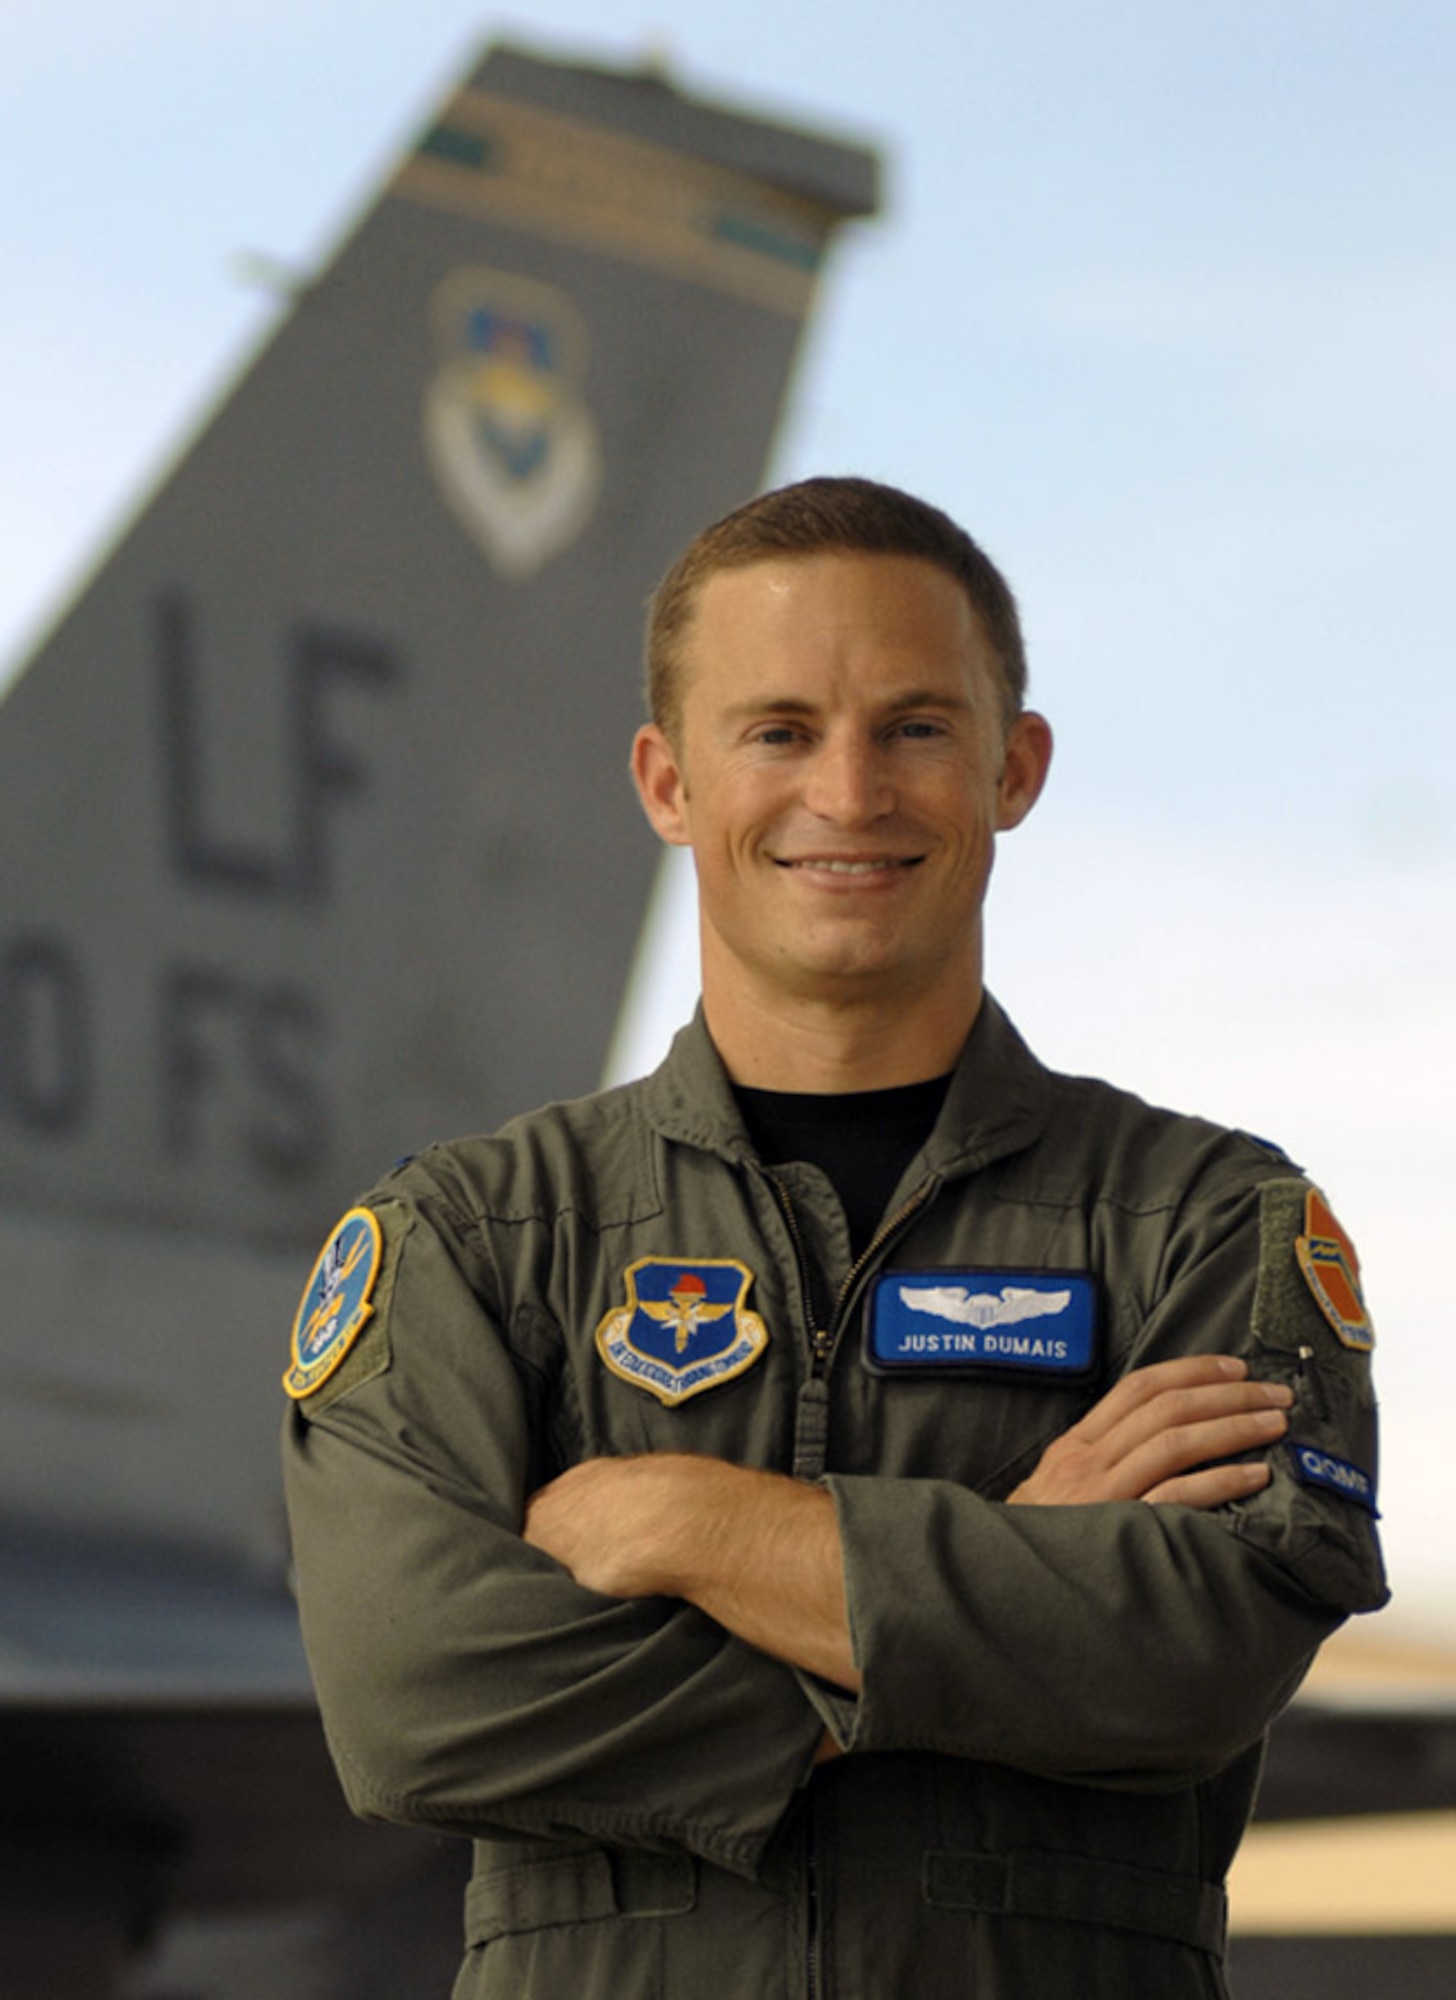 1st Lt. Justin Dumais, a diver in the 2004 Olympics in Athens, chose to trade his diving aspirations for flying aspirations, and joined the Air Force.  Currently, Lieutenant Dumais, an F-16 Fighting Falcon pilot with the South Carolina Air National Guard, is cheering for his brother, Troy, who is completing in the 2008 Olympics in Beijing.  (U.S. Air Force photo)